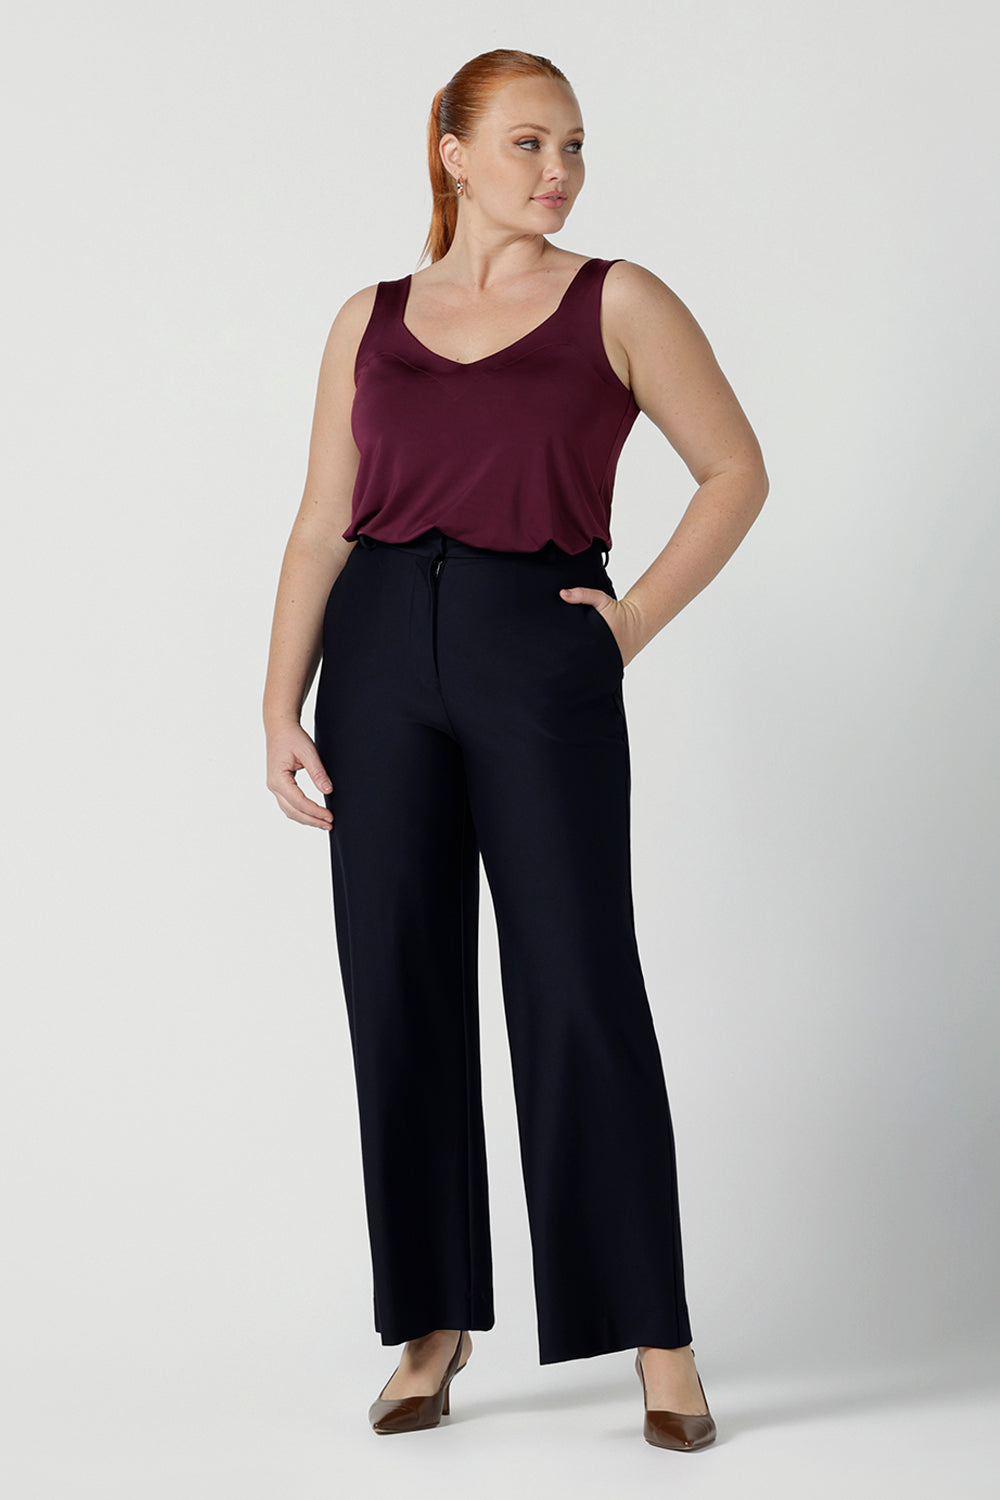 Eddy Cami top in Plum with wide straps. Made in Australia for women size 8 -24. style back with high waist Lulu pants in Navy. Soft tailored pants.